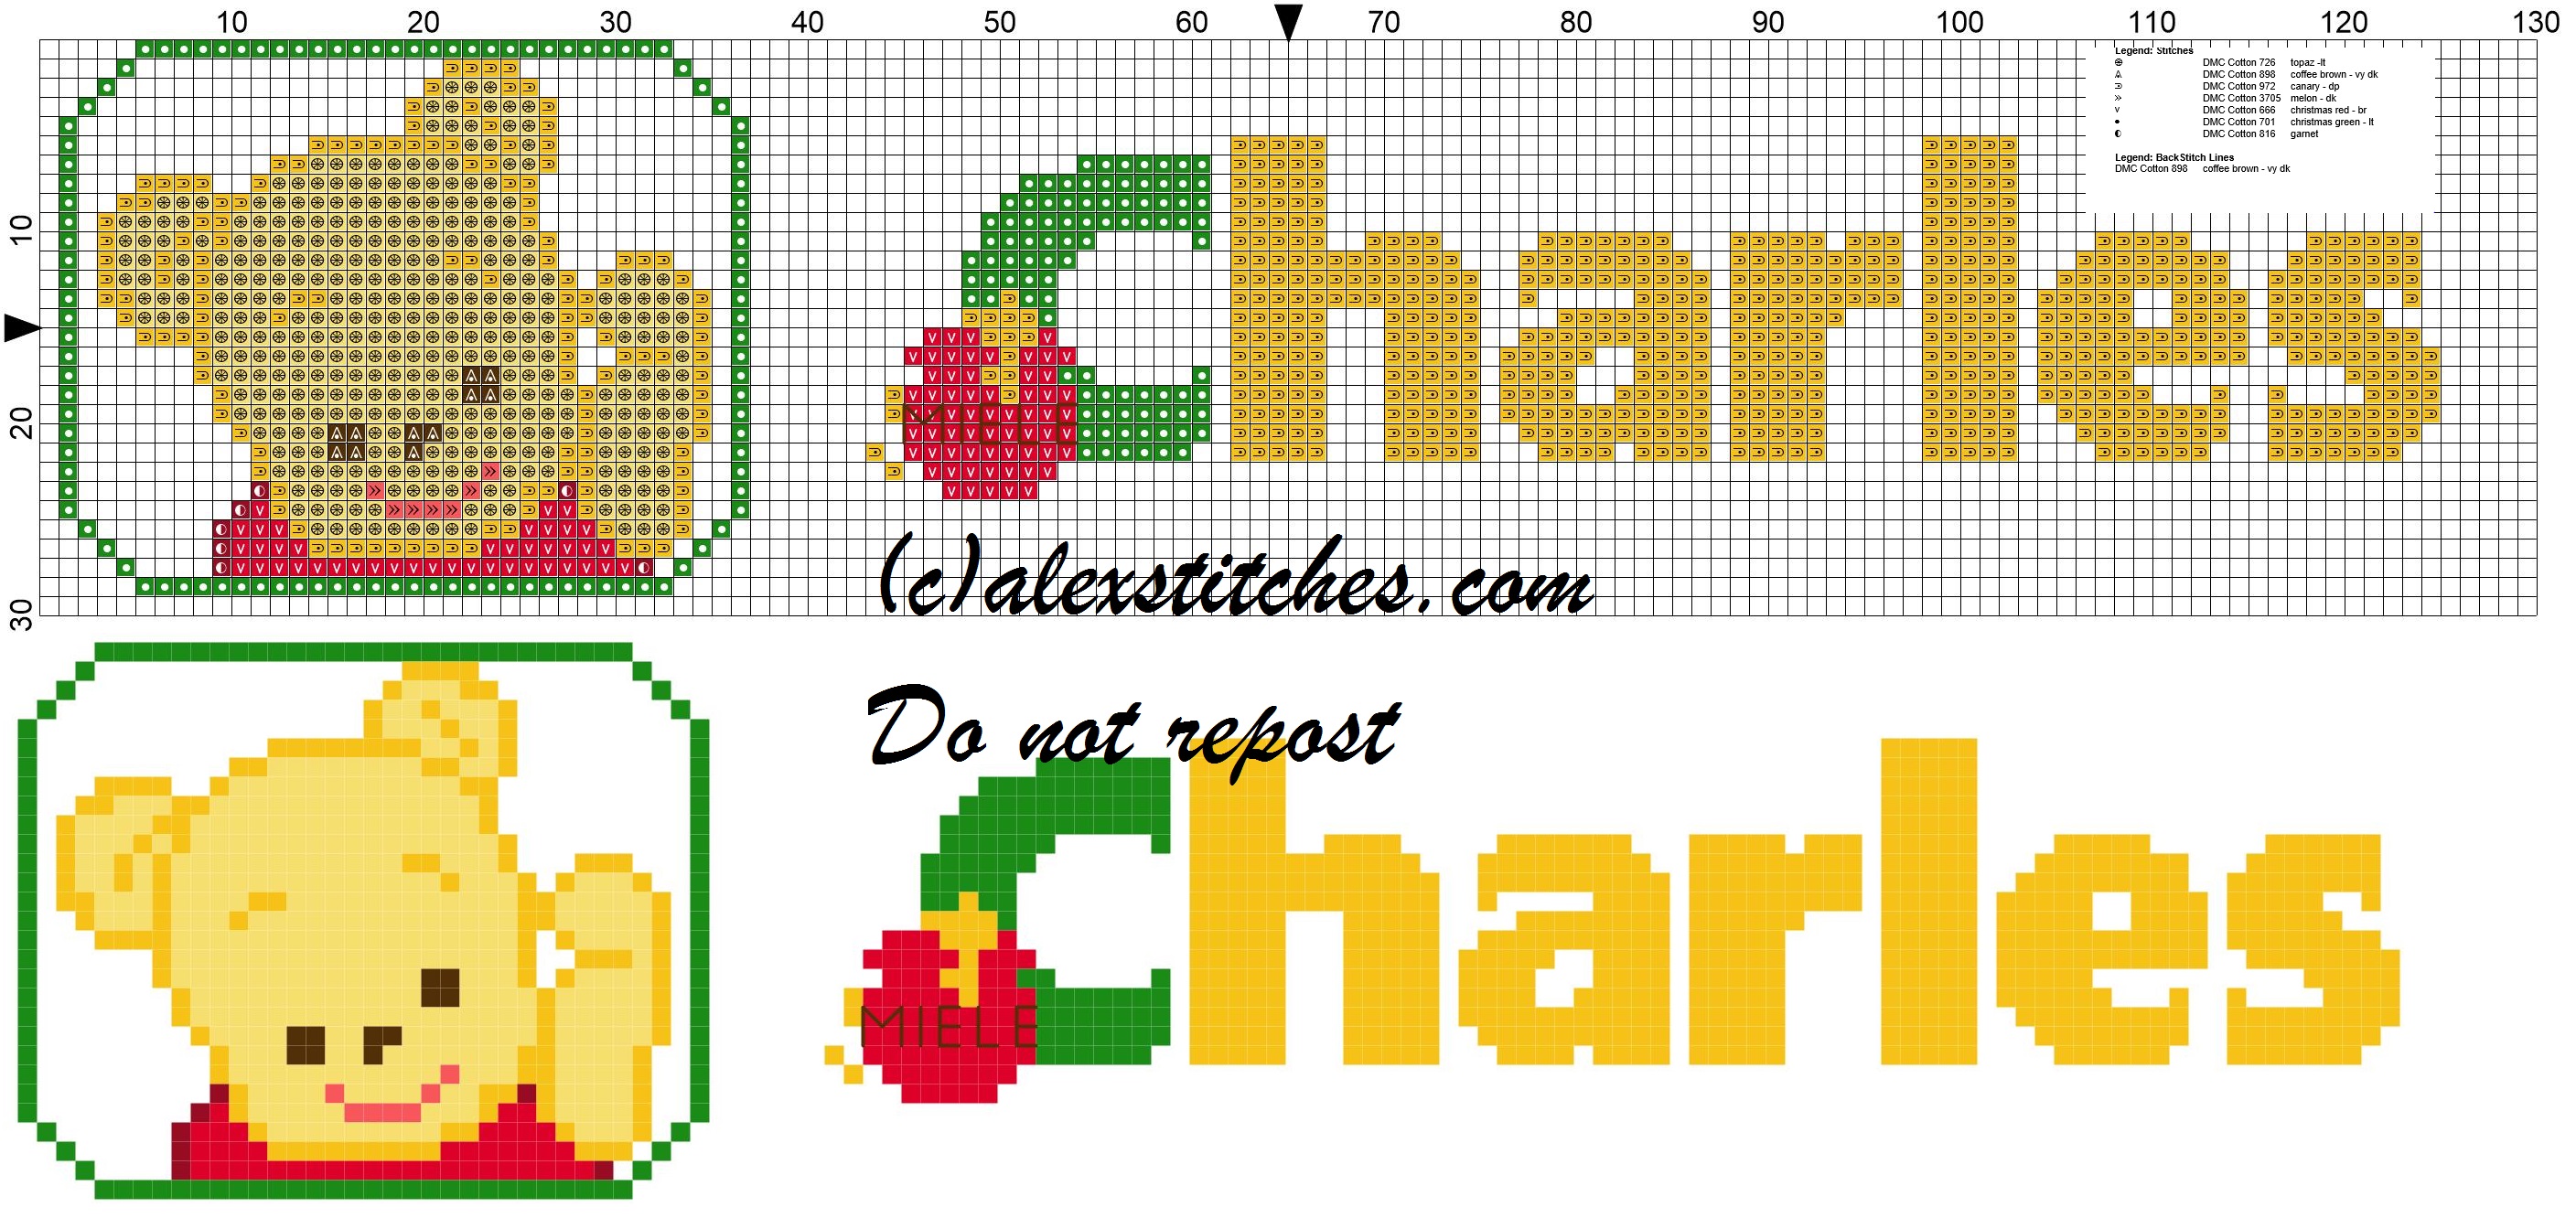 Charles name with Baby winnie the pooh free cross stitches pattern